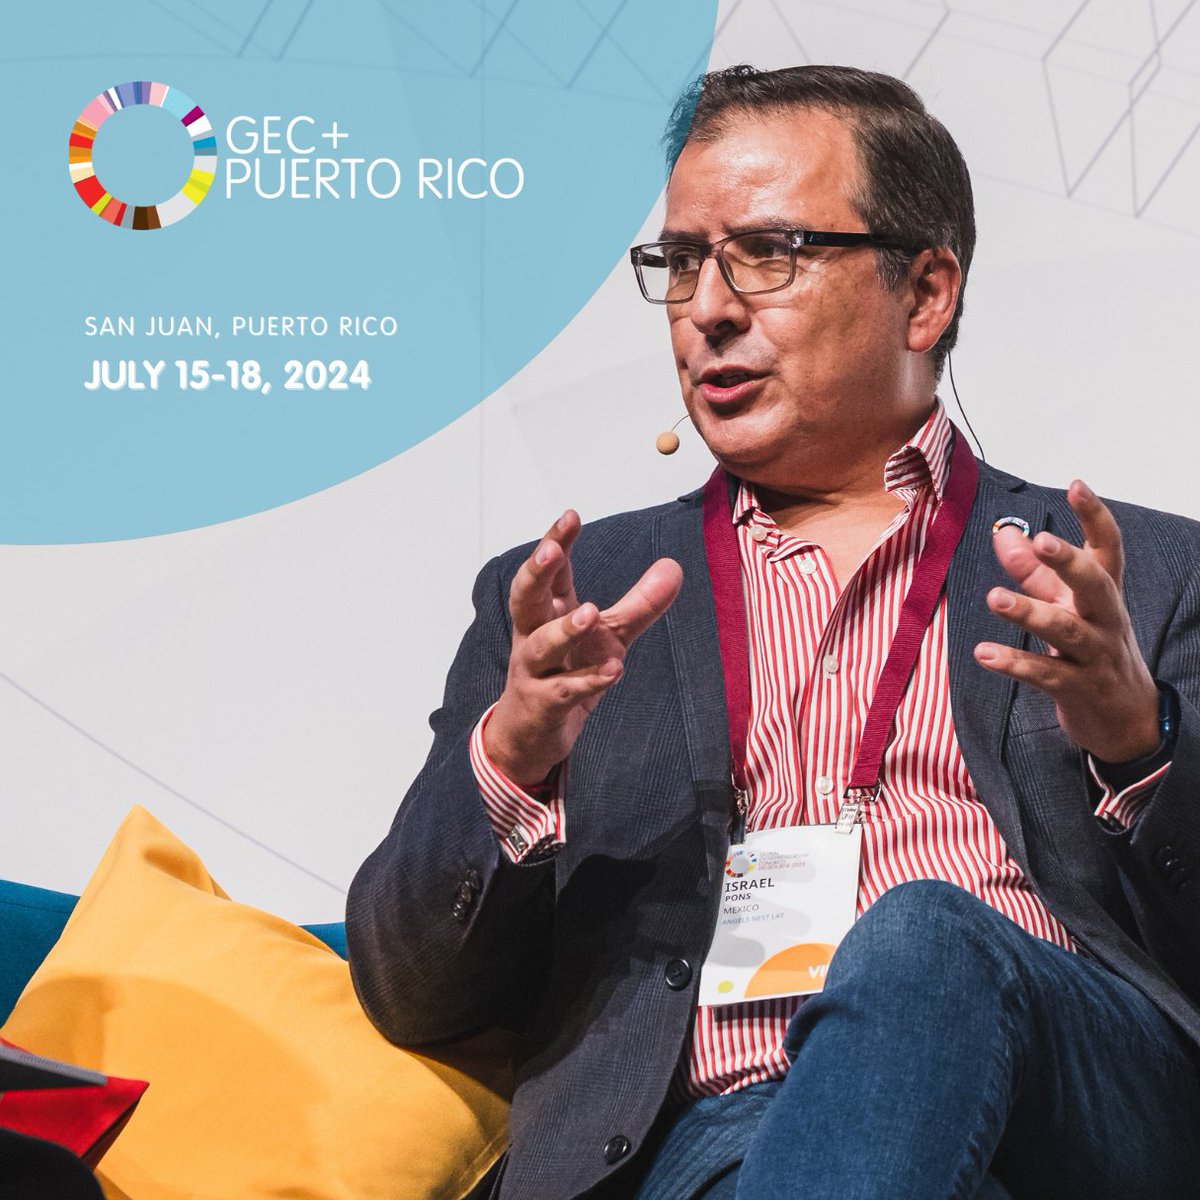 GEC+Puerto Rico will bring an ambitious vision for Latin America + the Caribbean to life. Join us July 15-18, 2024 in San Juan: gecplus.co/puertorico #GECPlusPR